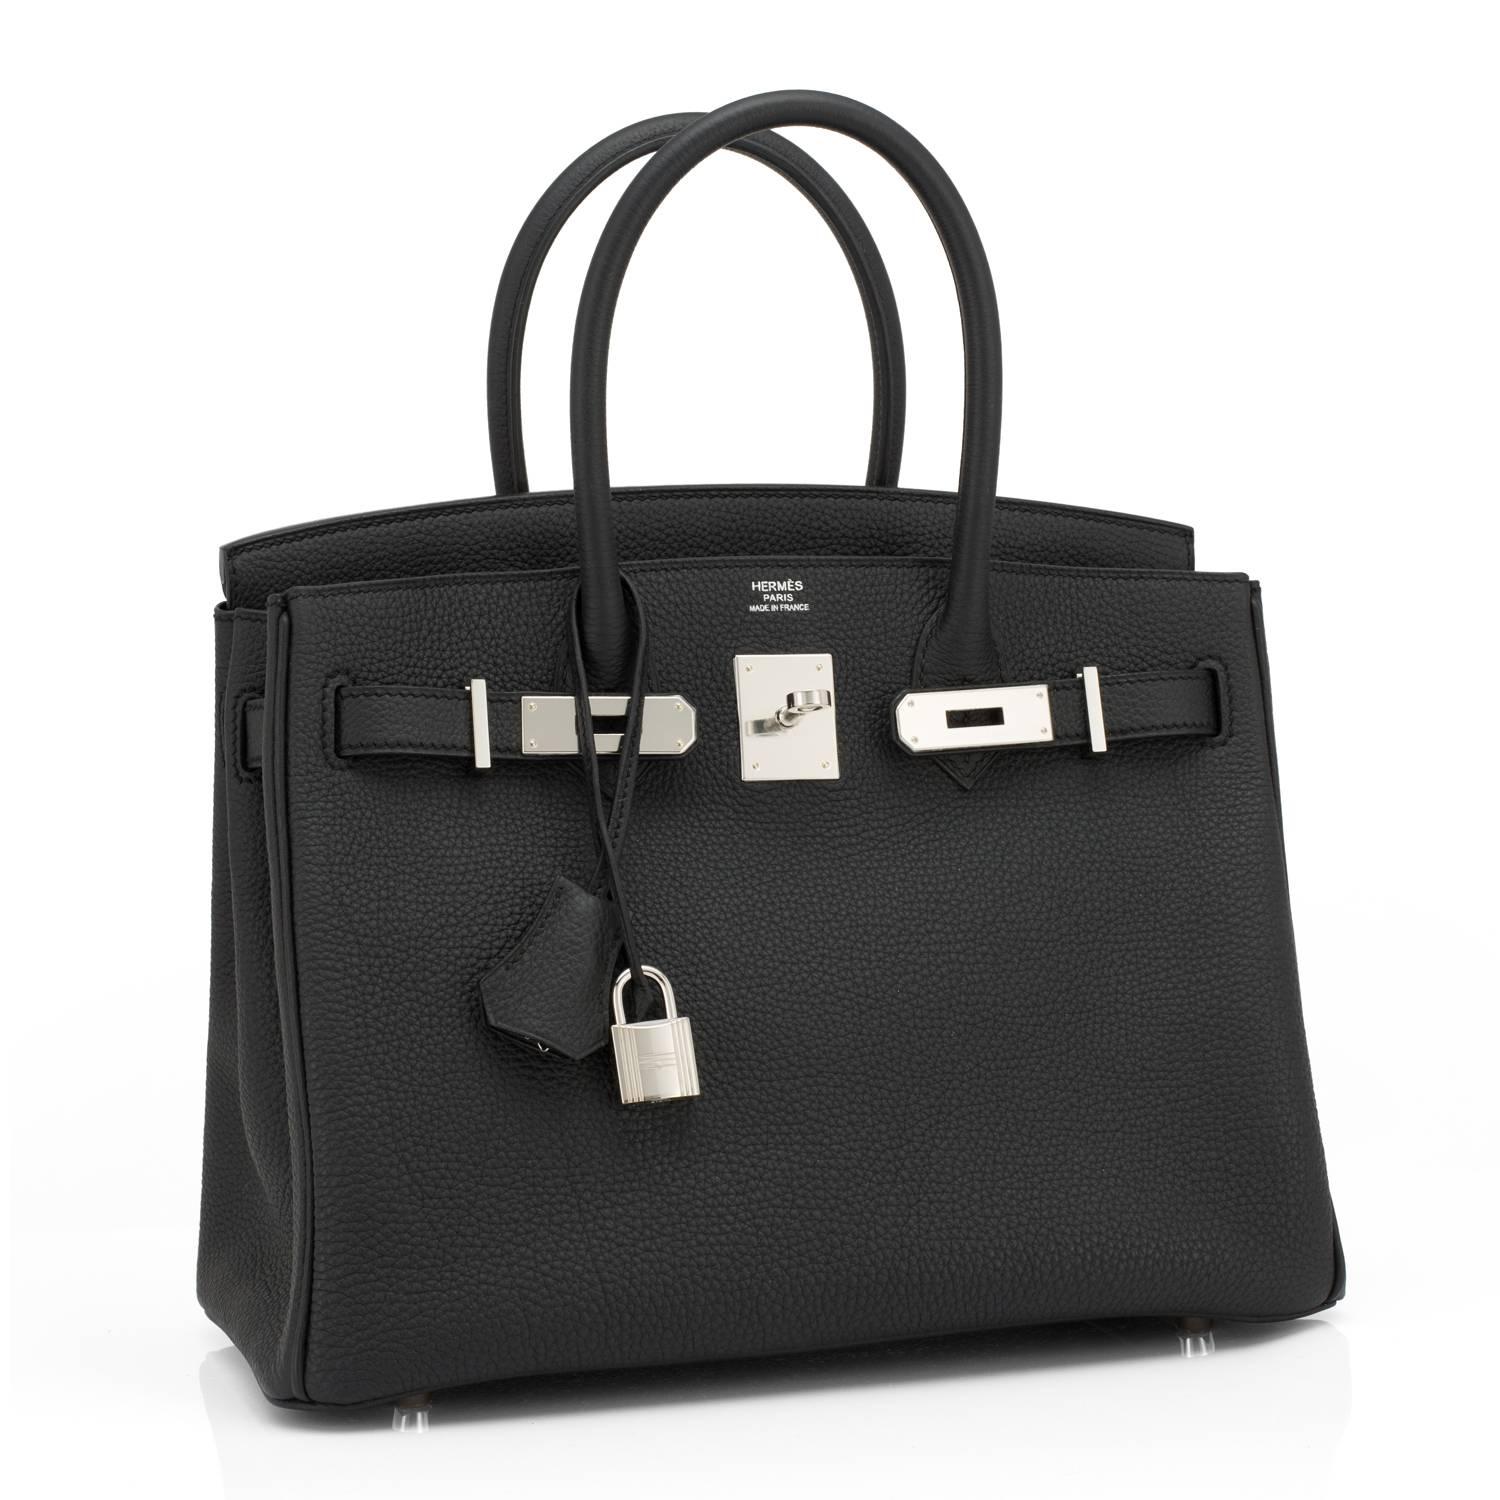 Hermes Black Togo 30cm Birkin Palladium Hardware Leather Bag 
Brand New in Box. Store fresh. Pristine condition (with plastic on hardware)
Perfect gift!  Comes with keys, lock, clochette, a sleeper for the bag, rain protector, and Hermes box. 
A